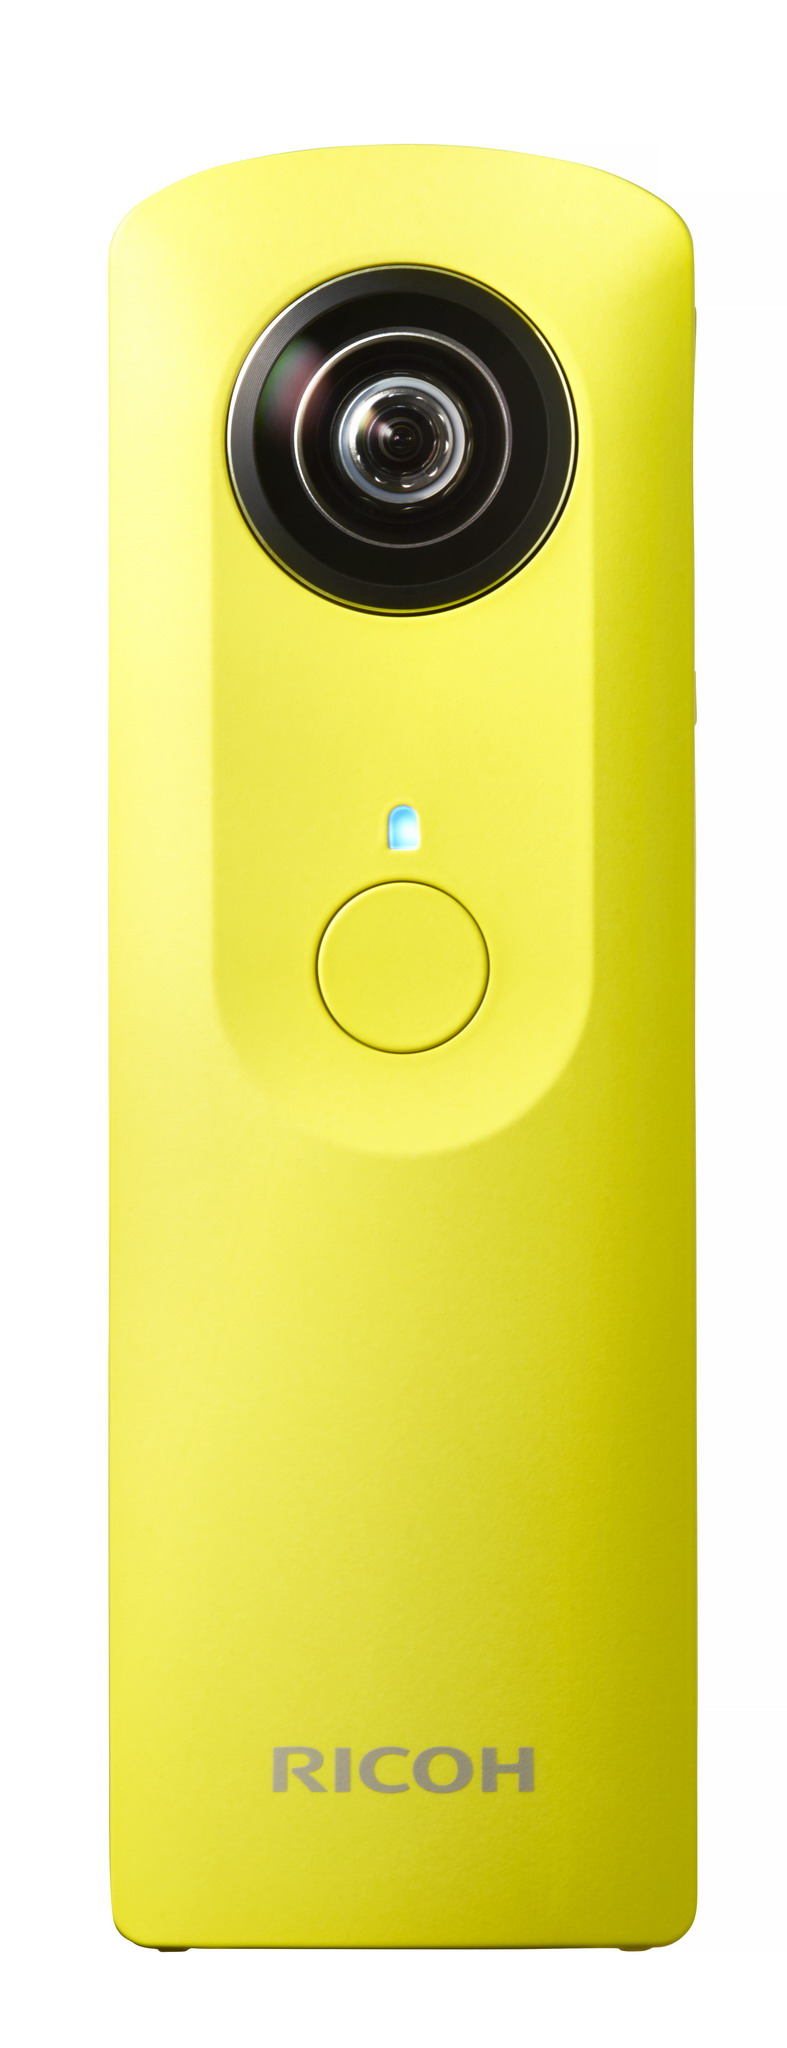 New RICOH THETA model, capturing 360-degree images in one shot, is